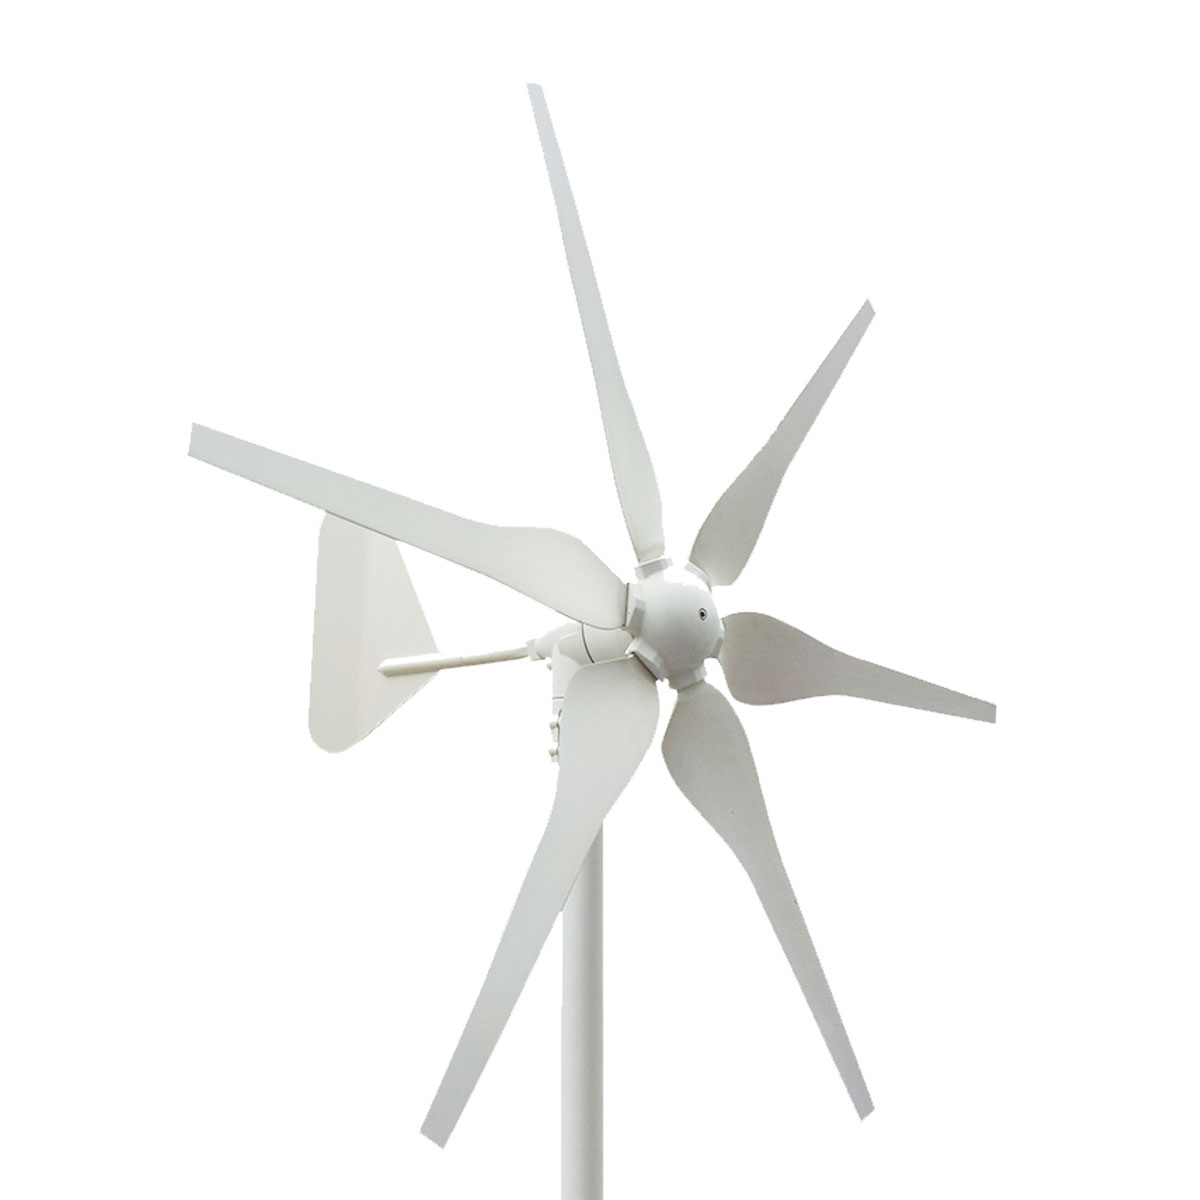 

500W 6 Blades 12V/24V Horizontal Wind Generator Turbine Residential with Controller